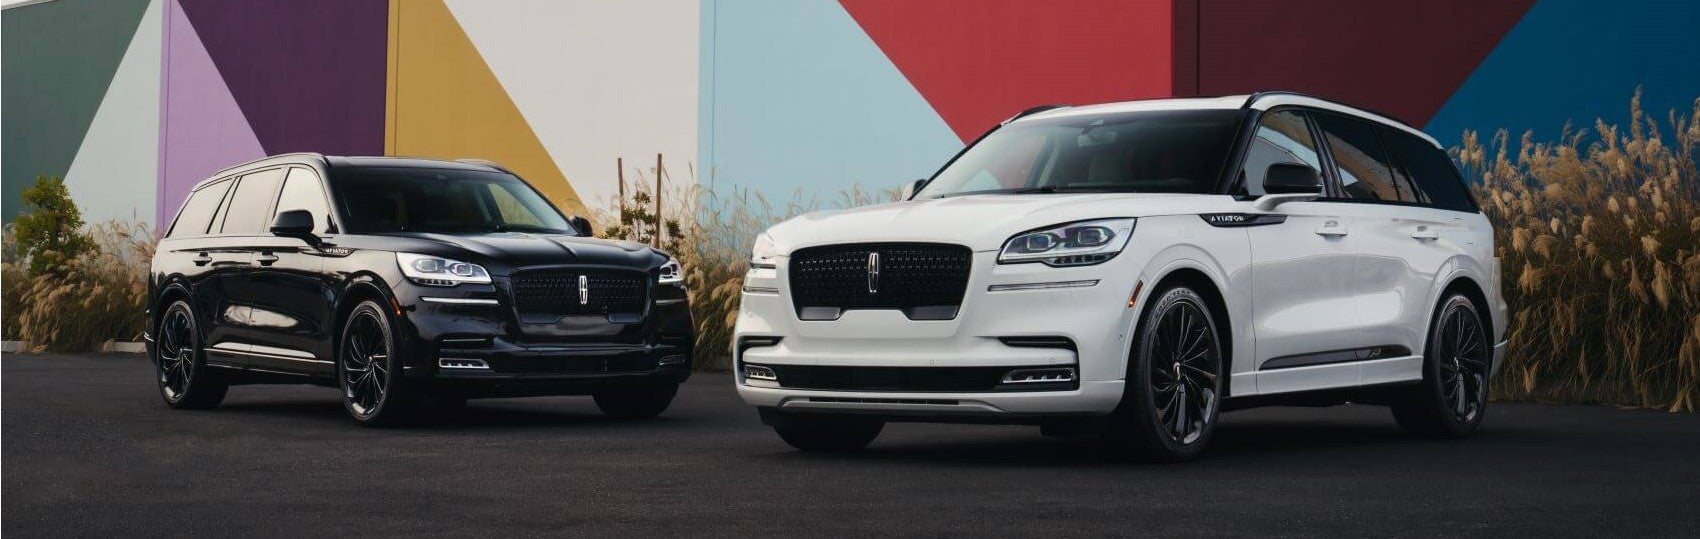 Lincoln Aviator Snipped